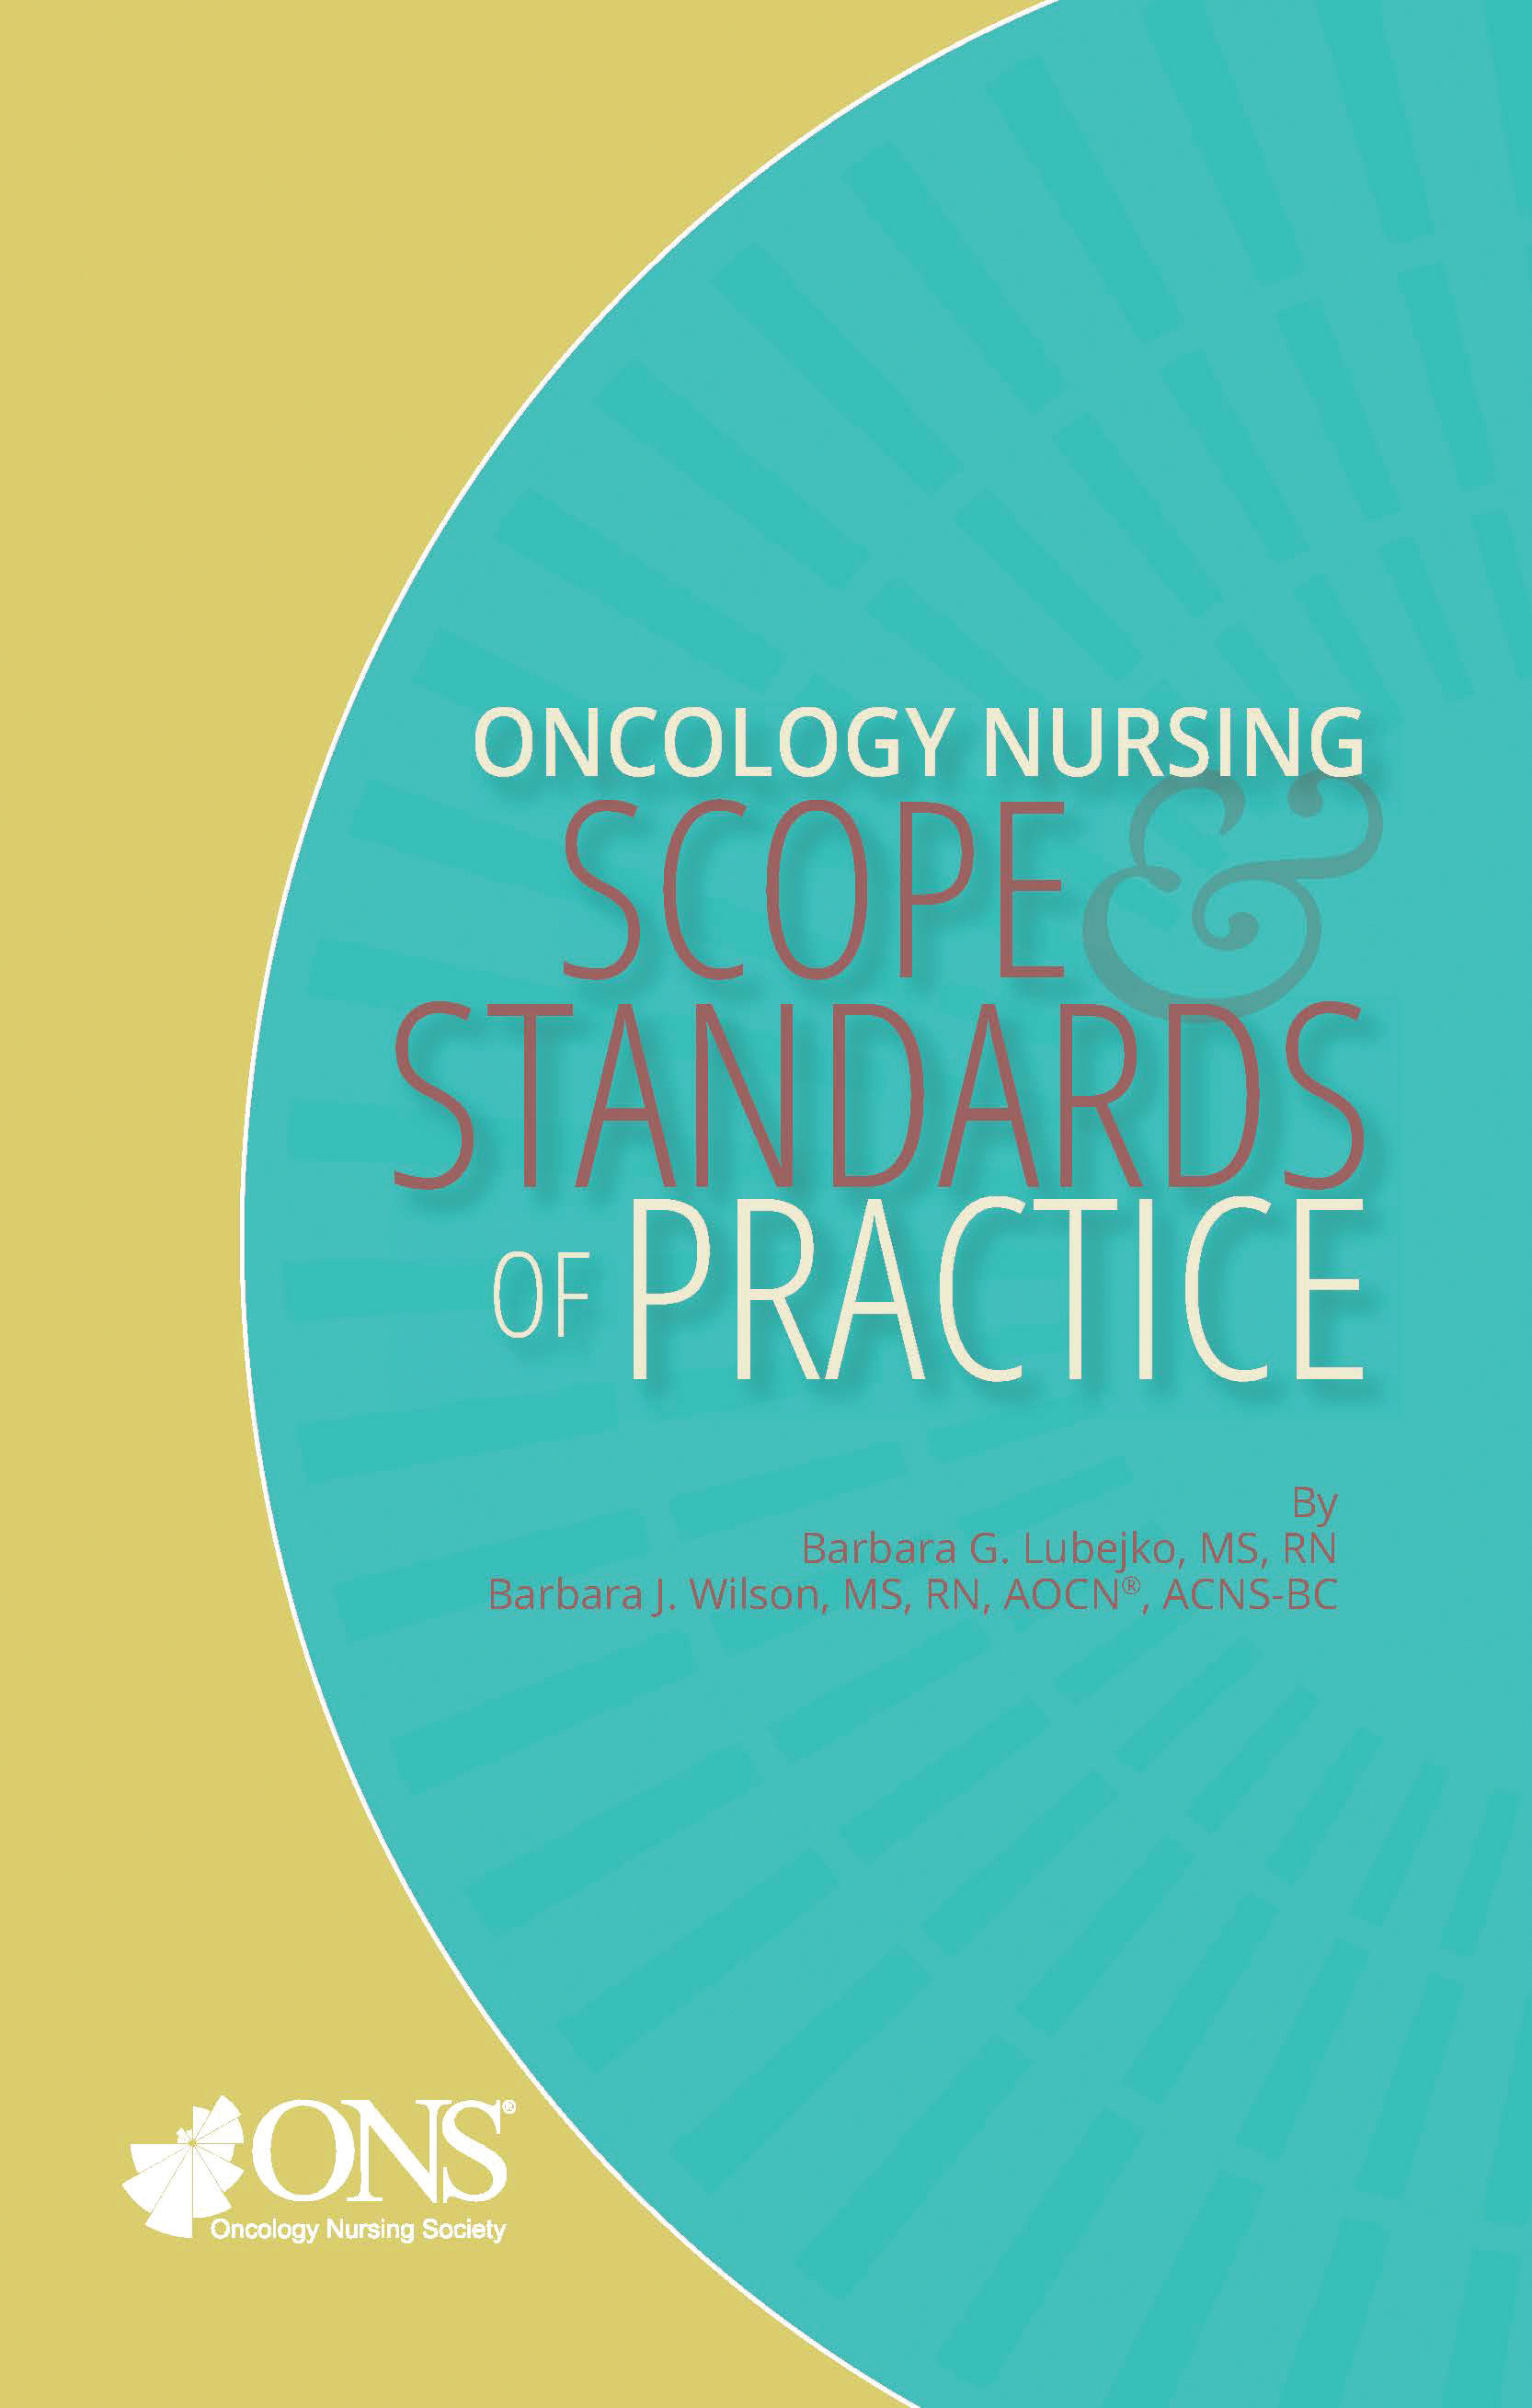 To ensure that the Oncology Nursing: Scope and Standards of Practice are consistent with overall nursing standards and to increase the visibility of the oncology nursing standards in the greater nursing and healthcare communities, ONS released an updated version of its reference book in March 2019. The American Nurses Association (ANA) recognizes oncology nursing as a nursing specialty, and the new edition carries ANA’s approval of the oncology nursing scope of practice and acknowledgement of the oncology n